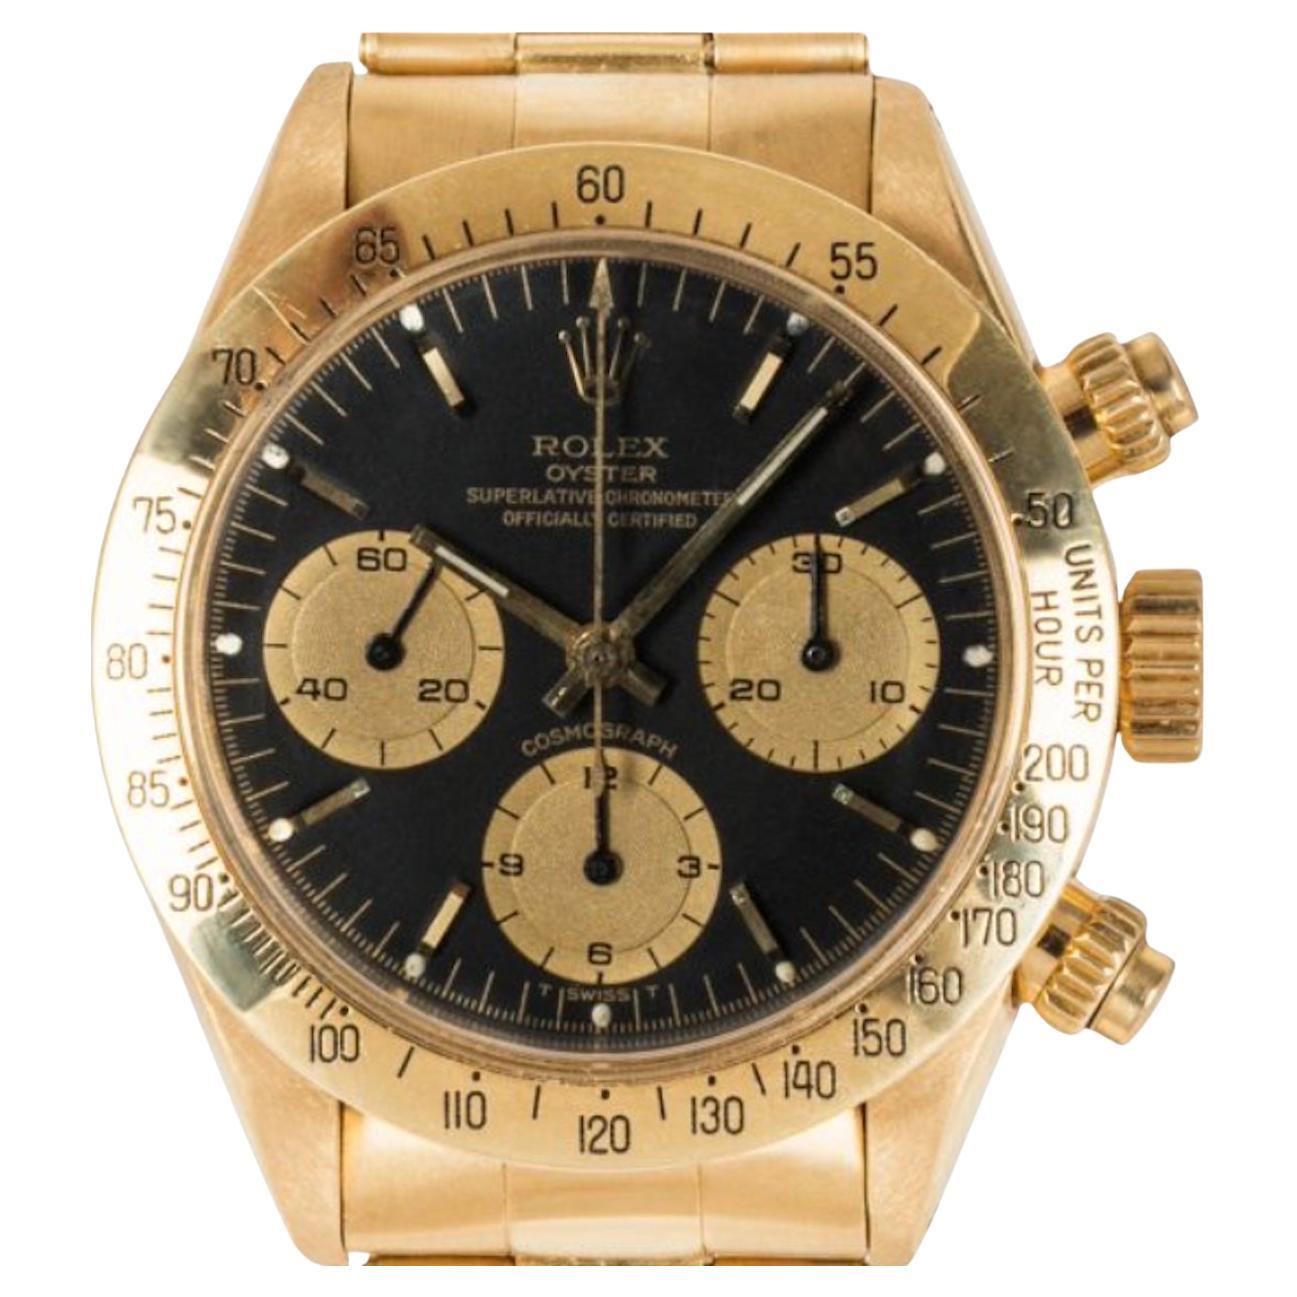 An extremely rare vintage Cosmograph Daytona with the reference 6265 crafted in yellow gold, which is known to be manufactured in limited amounts. Specifically, it is claimed that no more than 200 examples were cased in yellow gold when 6265 was in